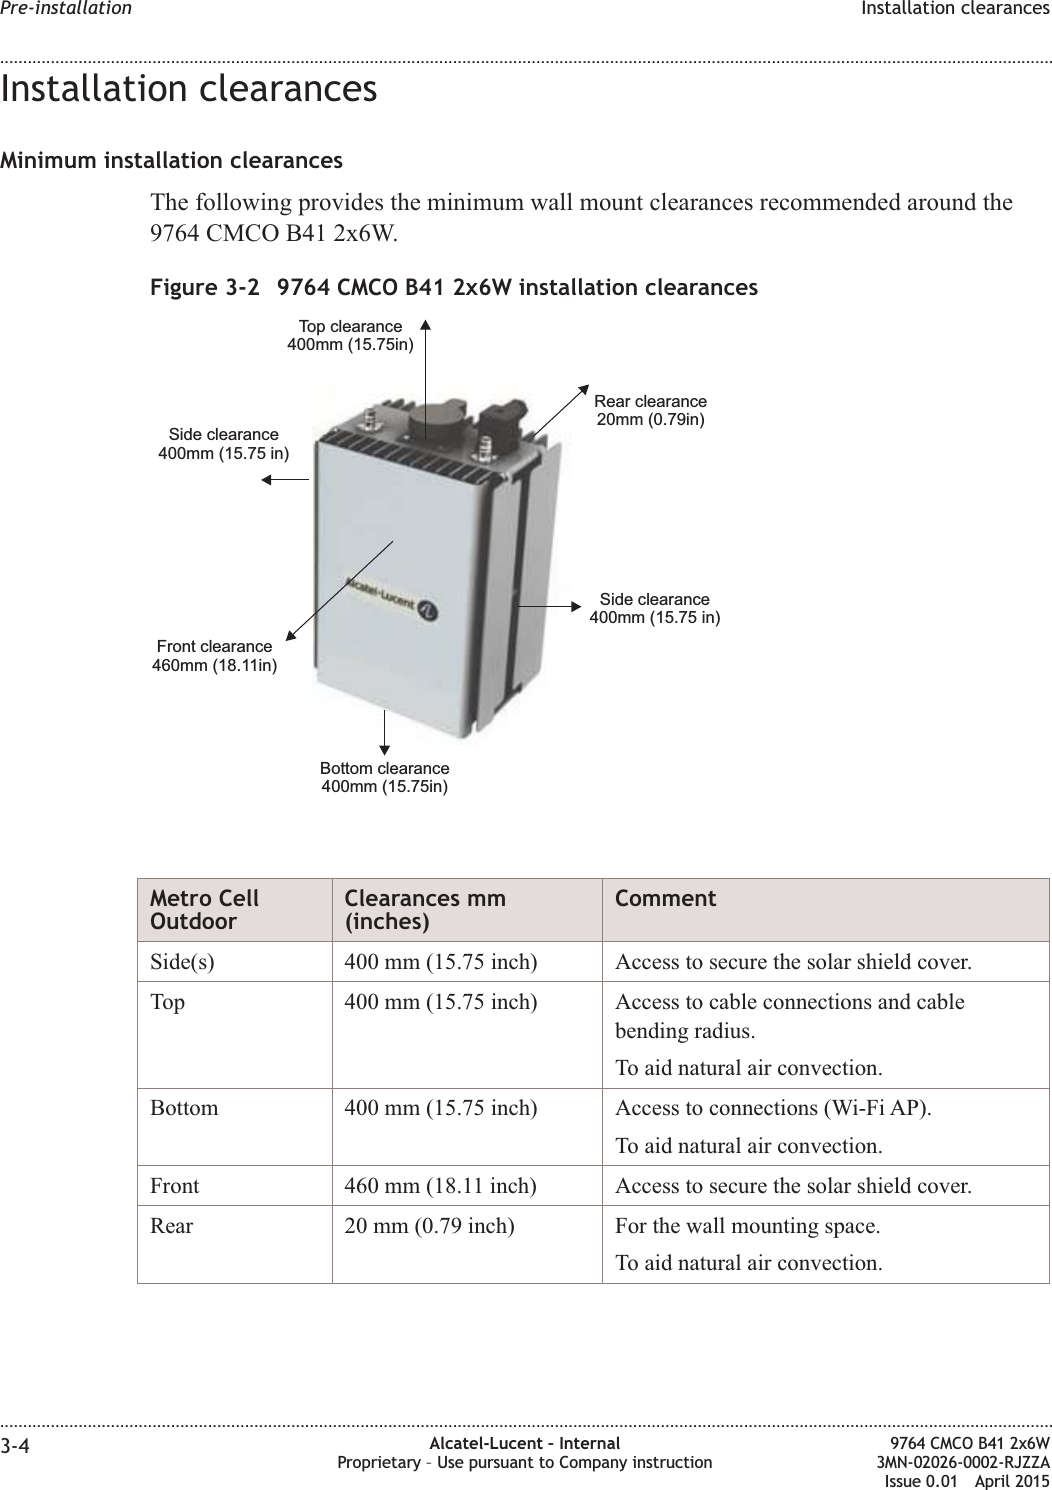 Installation clearancesMinimum installation clearancesThe following provides the minimum wall mount clearances recommended around the9764 CMCO B41 2x6W.Metro CellOutdoorClearances mm(inches)CommentSide(s) 400 mm (15.75 inch) Access to secure the solar shield cover.Top 400 mm (15.75 inch) Access to cable connections and cablebending radius.To aid natural air convection.Bottom 400 mm (15.75 inch) Access to connections (Wi-Fi AP).To aid natural air convection.Front 460 mm (18.11 inch) Access to secure the solar shield cover.Rear 20 mm (0.79 inch) For the wall mounting space.To aid natural air convection.Figure 3-2 9764 CMCO B41 2x6W installation clearancesRear clearance20mm (0.79in)Front clearance460mm (18.11in)Bottom clearance400mm (15.75in)Side clearance400mm (15.75 in)Top clearance400mm (15.75in)Side clearance400mm (15.75 in)Pre-installation Installation clearances........................................................................................................................................................................................................................................................................................................................................................................................................................................................................3-4 Alcatel-Lucent – InternalProprietary – Use pursuant to Company instruction9764 CMCO B41 2x6W3MN-02026-0002-RJZZAIssue 0.01 April 2015PRELIMINARYPRELIMINARY